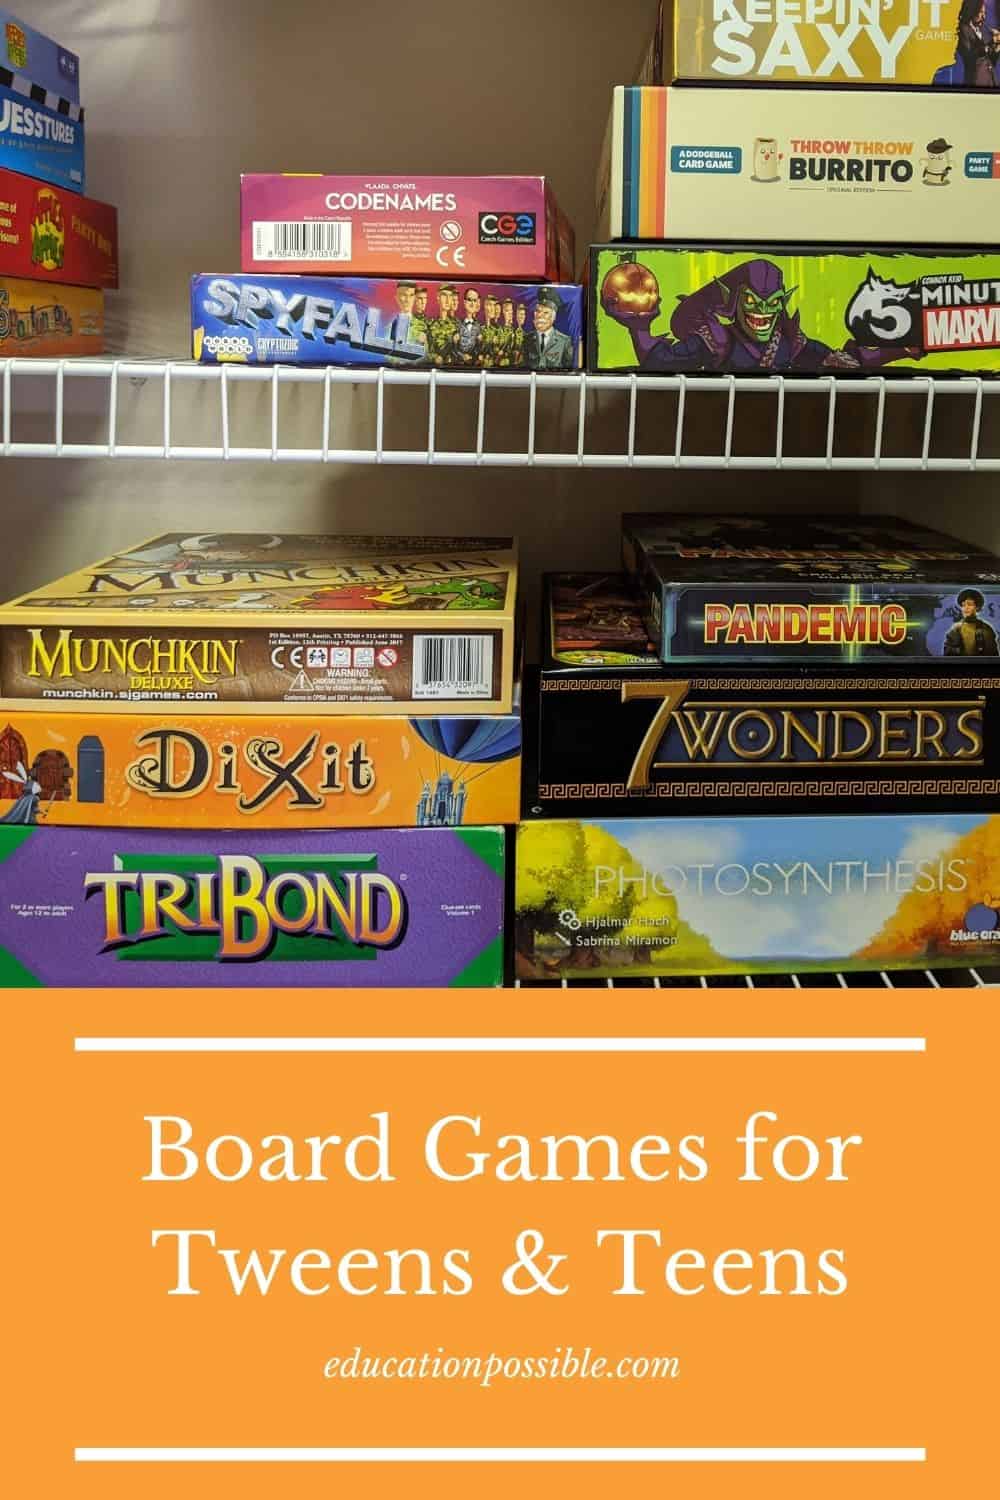 Board games stacked on two shelves in a closet. Below the image is an orange rectangle with text that reads Board Games for Tweens & Teens.